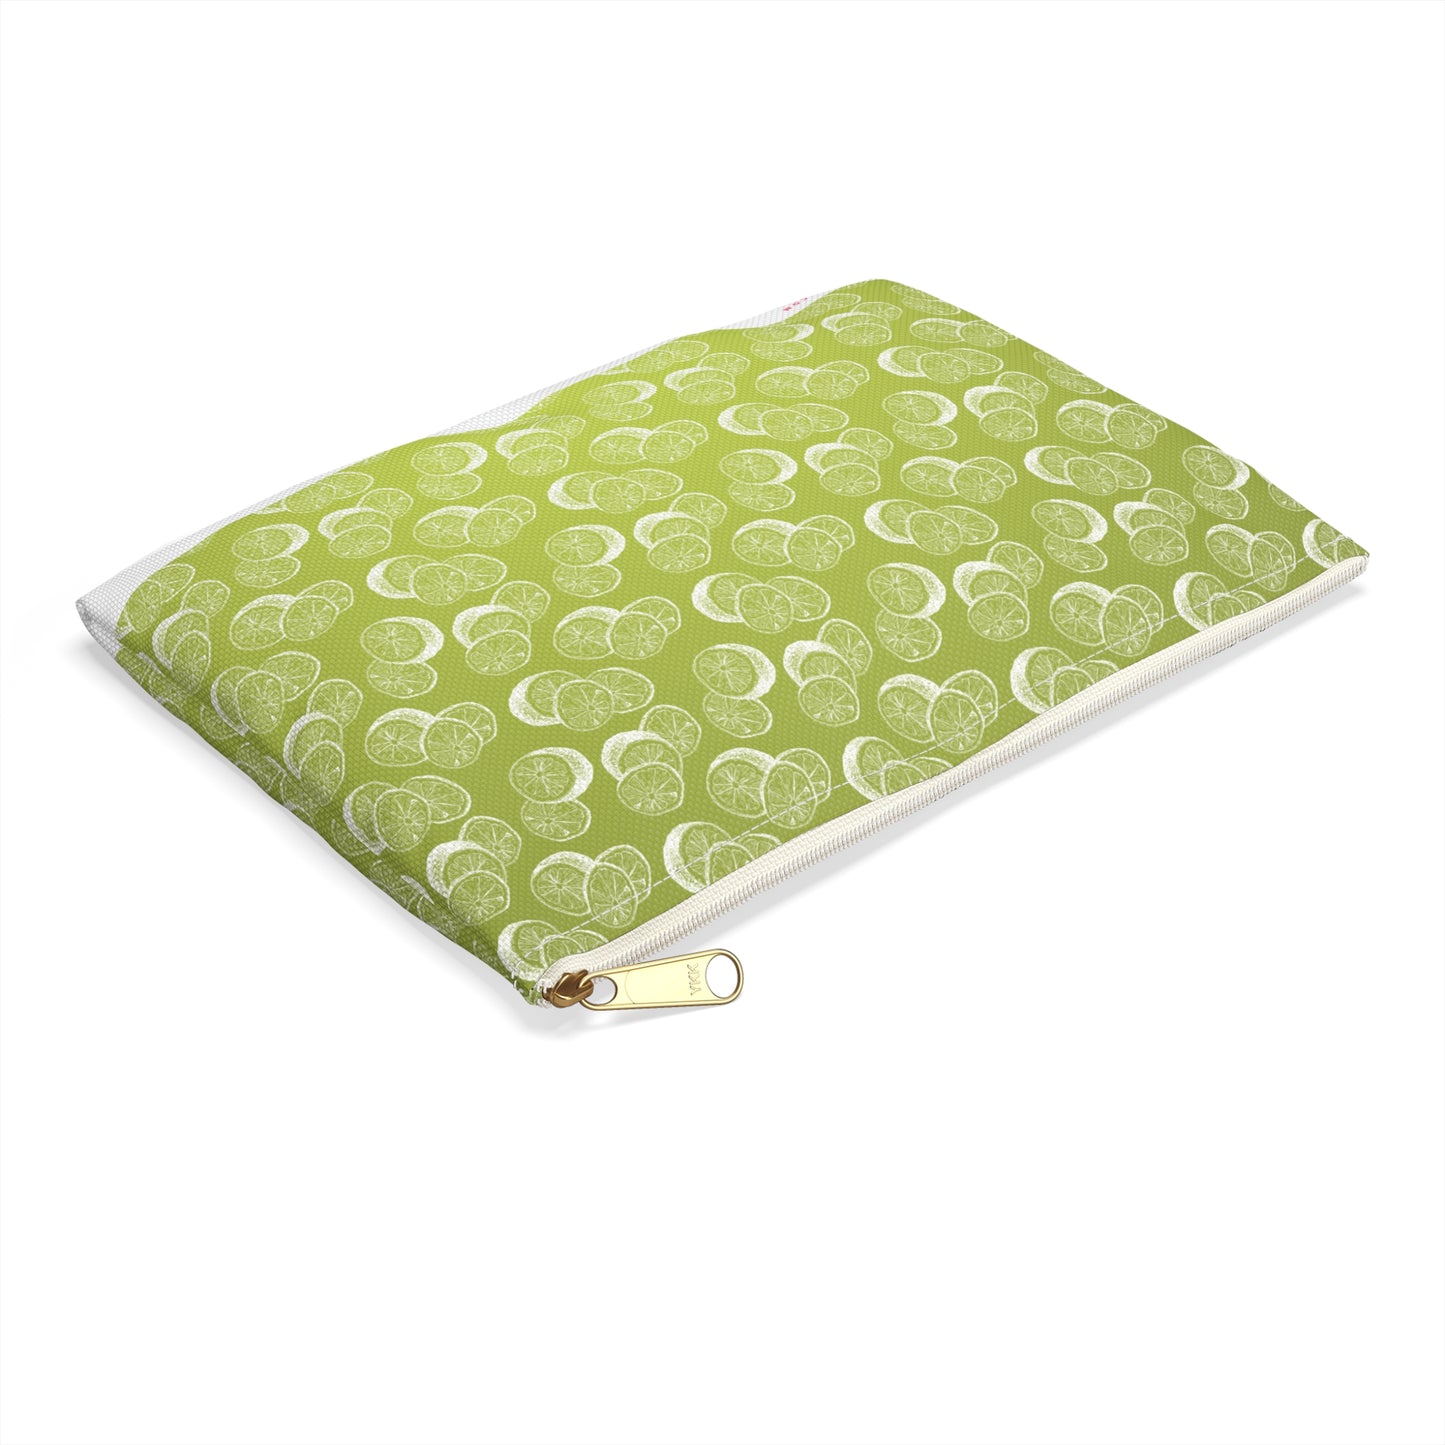 Juicy Limes Accessory Pouch